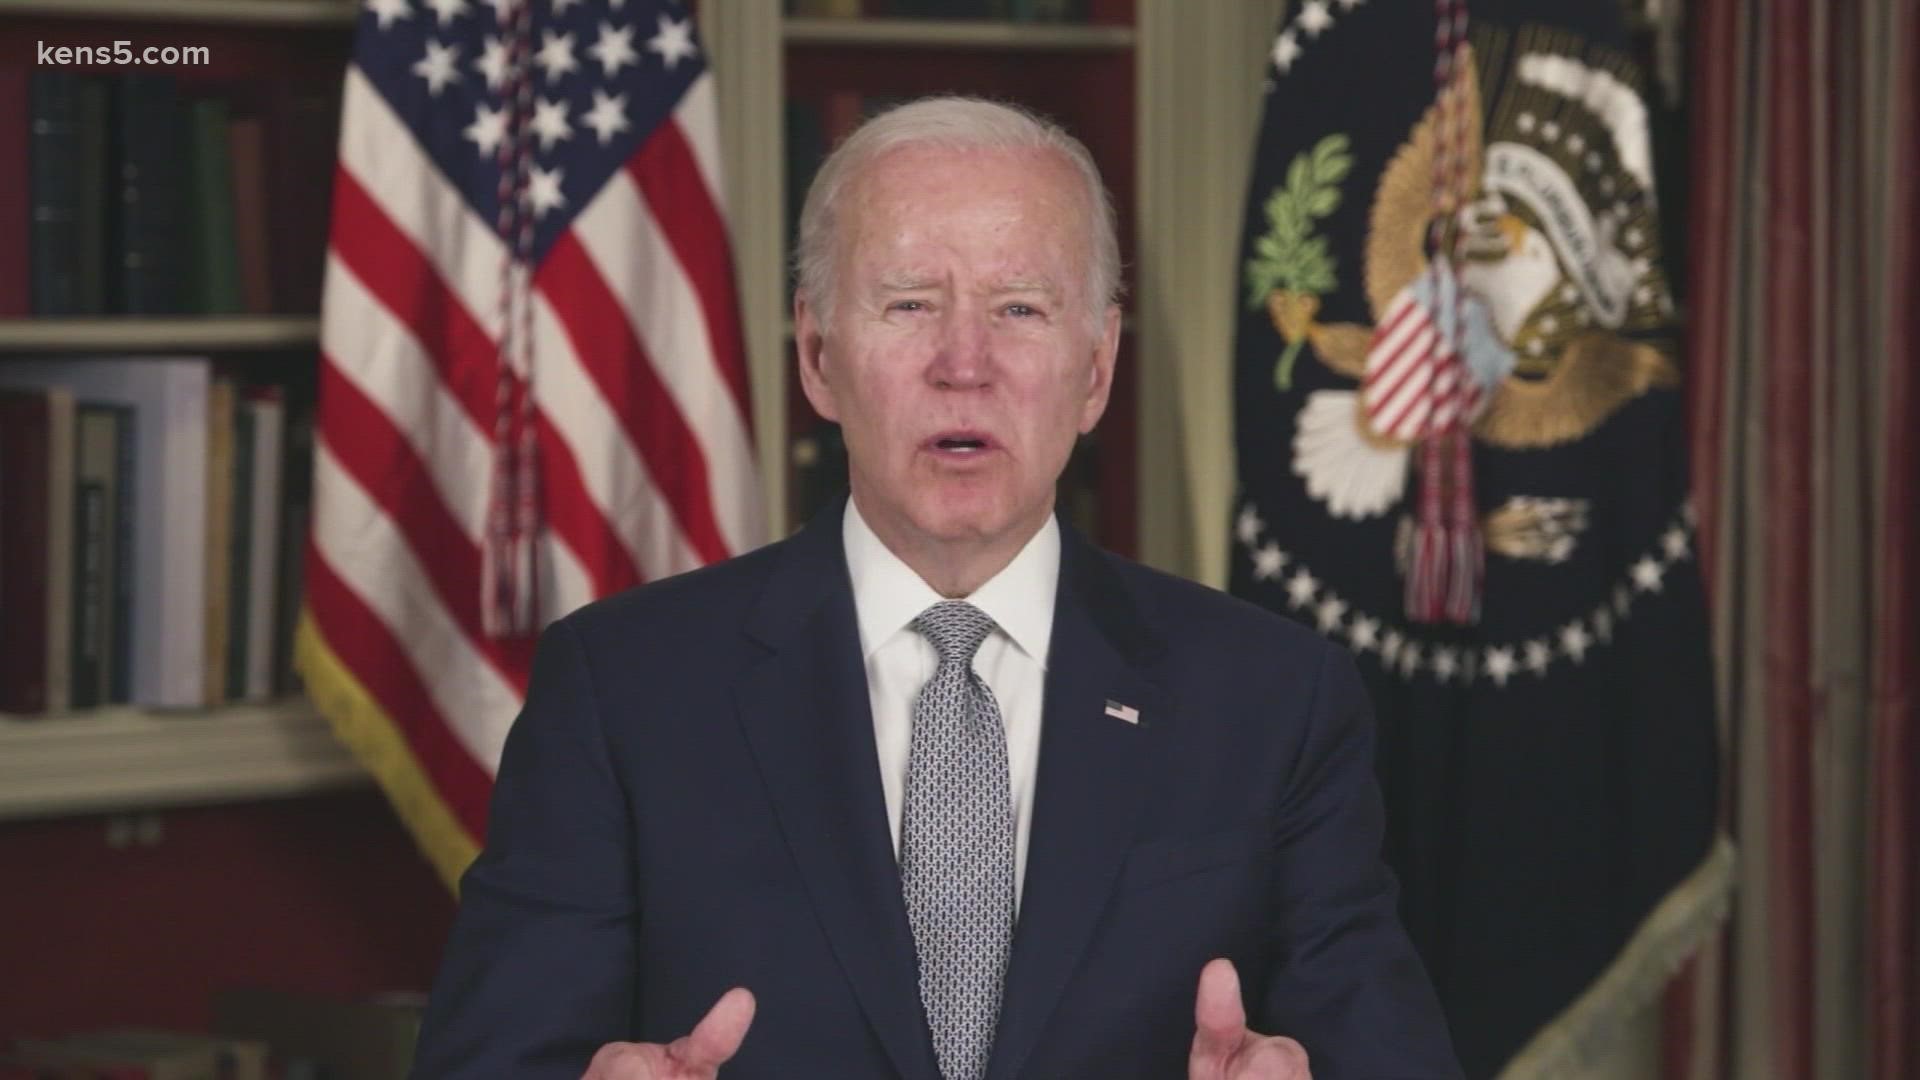 Biden marked the somber milestone with a pre-recorded video message from the White House.